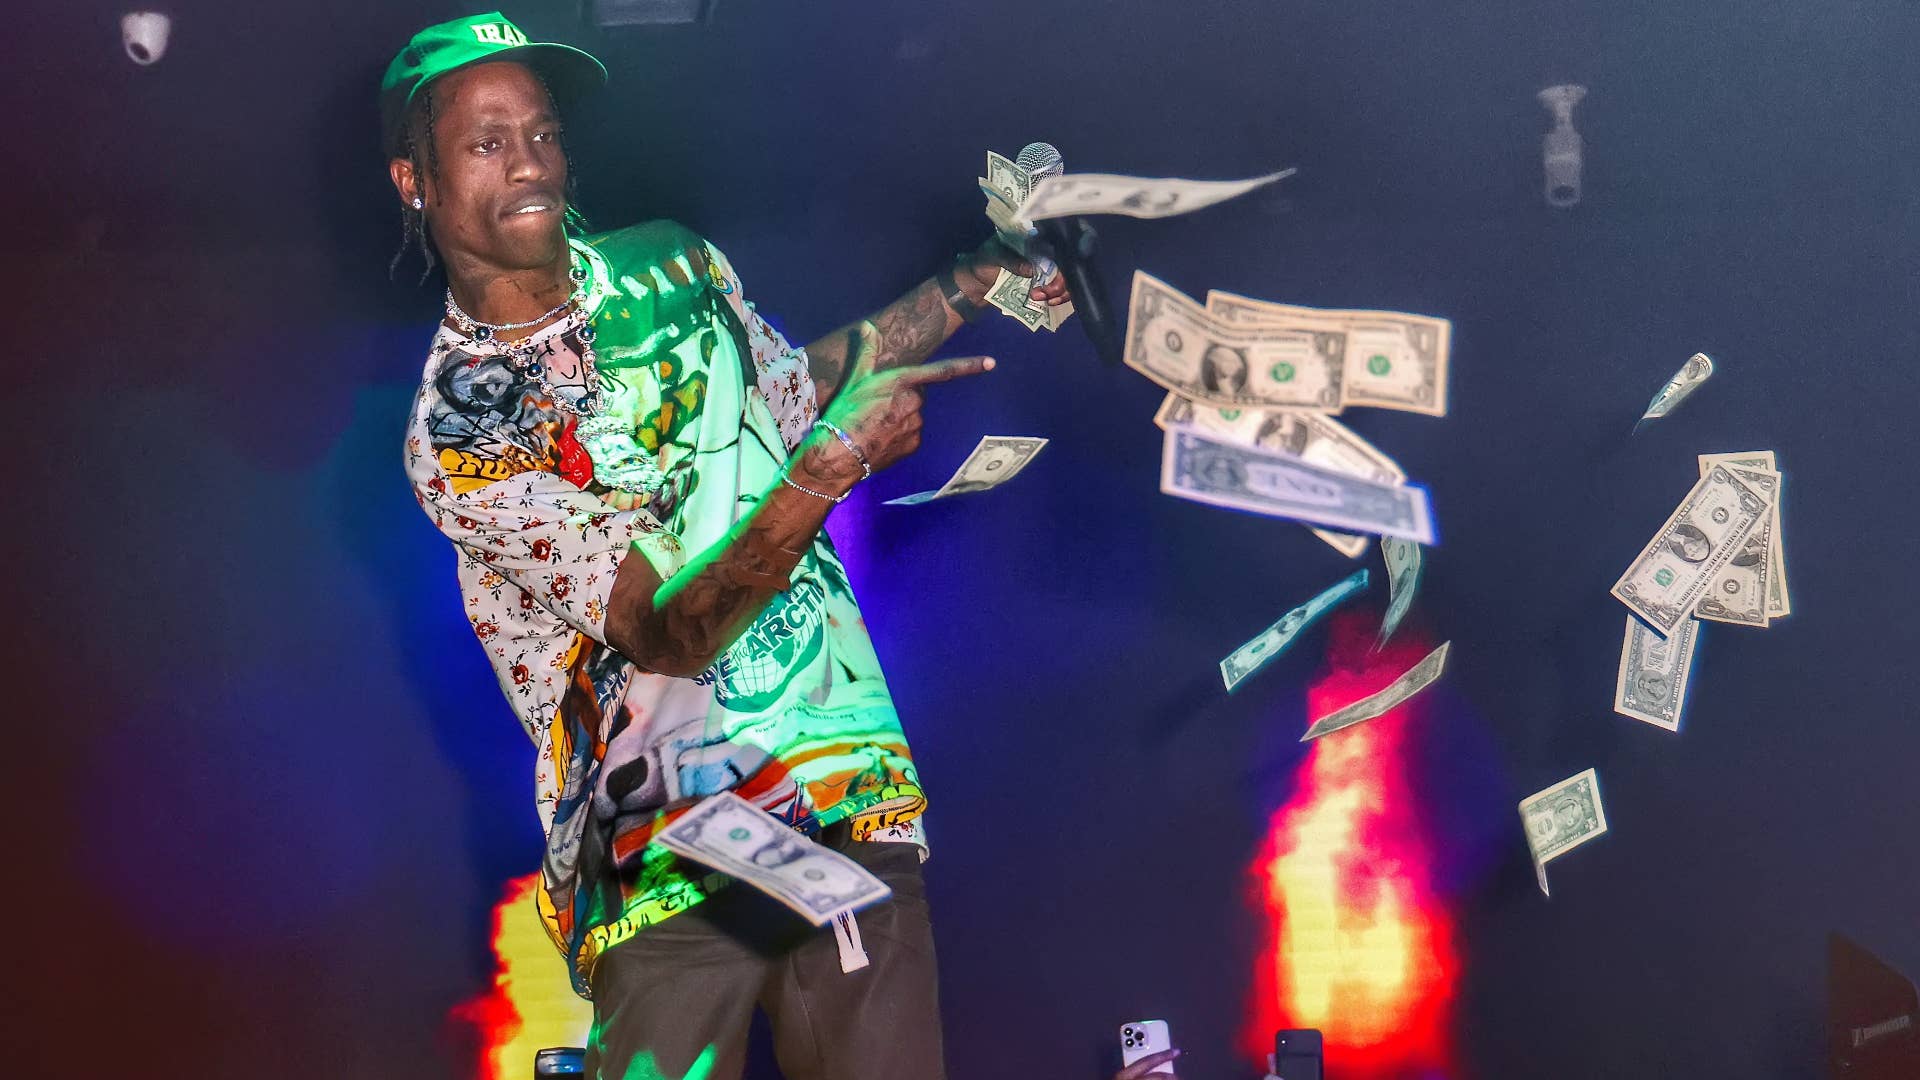 Travis Scott is seen performing at a club